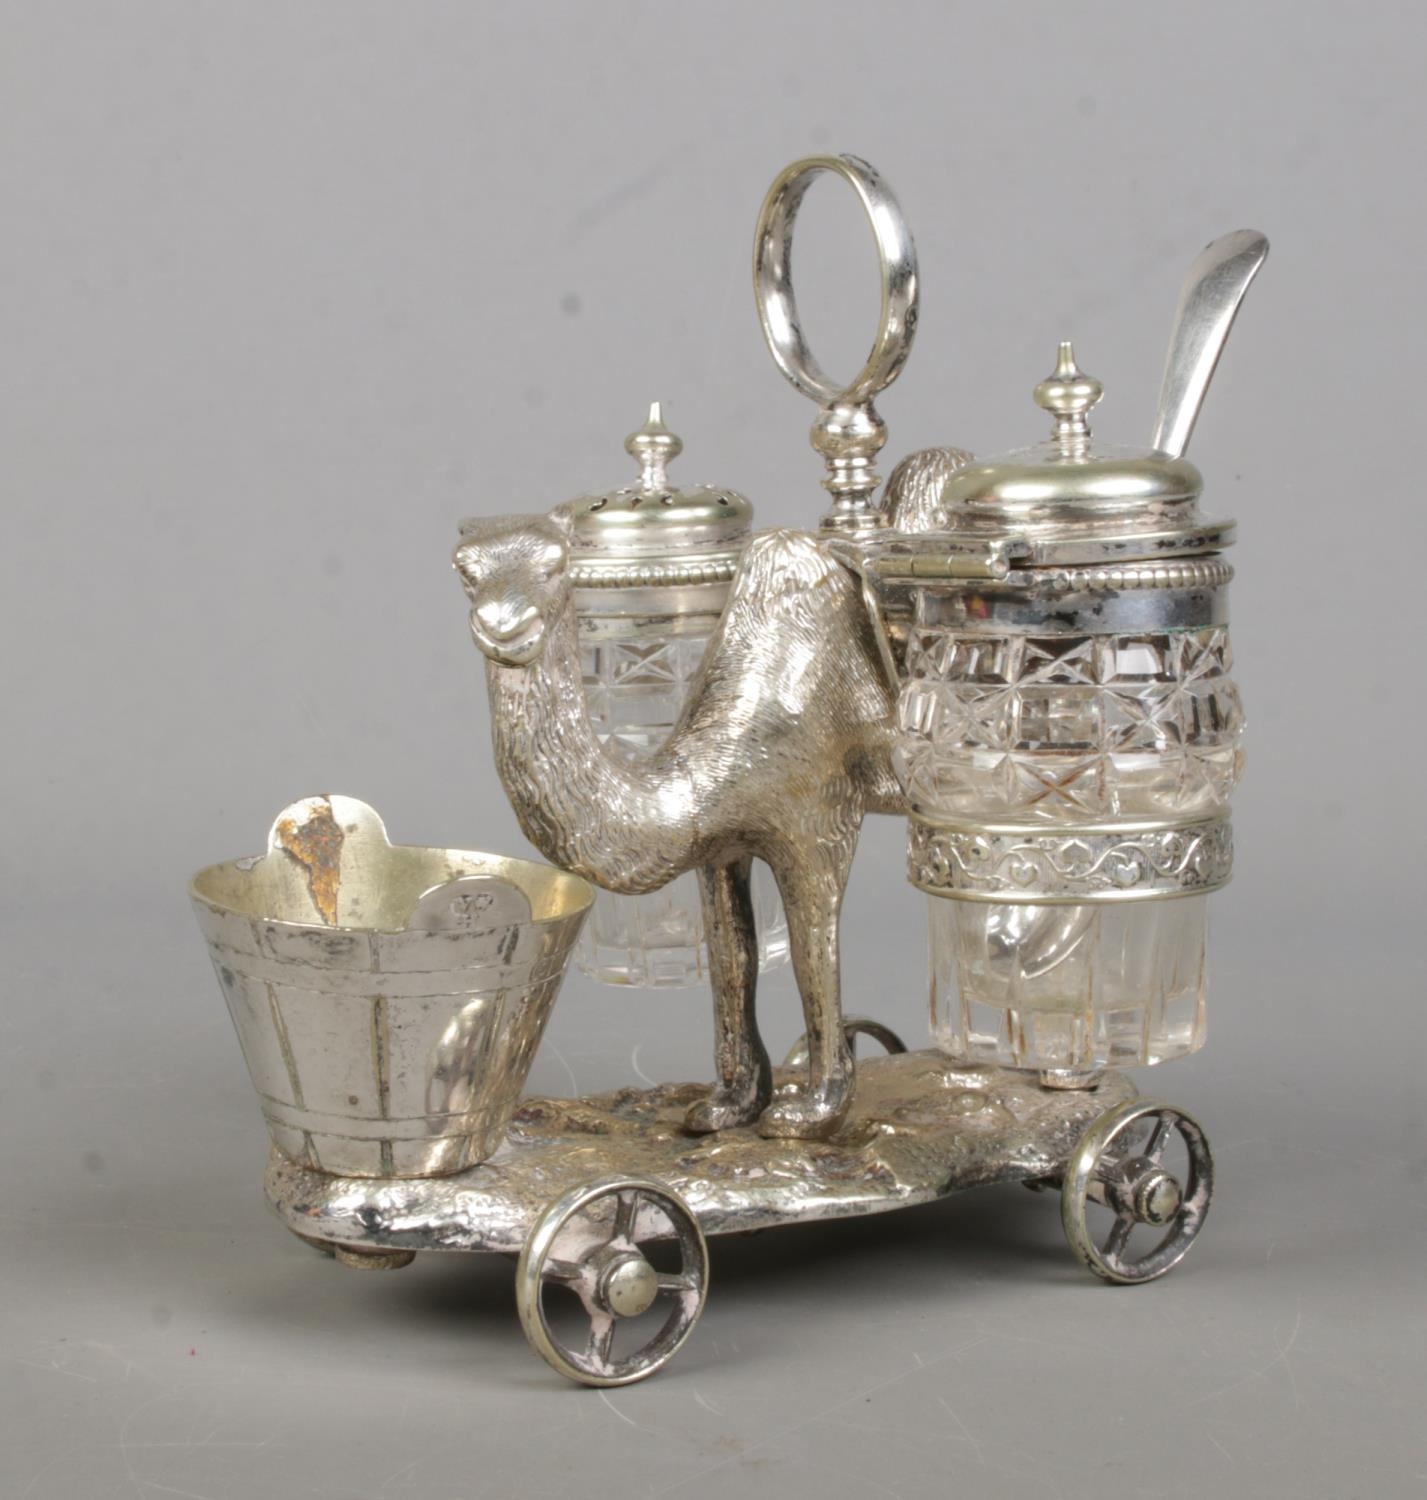 A Victorian novelty silver plated cruet set formed as a camel, with two glass panniers and bucket to